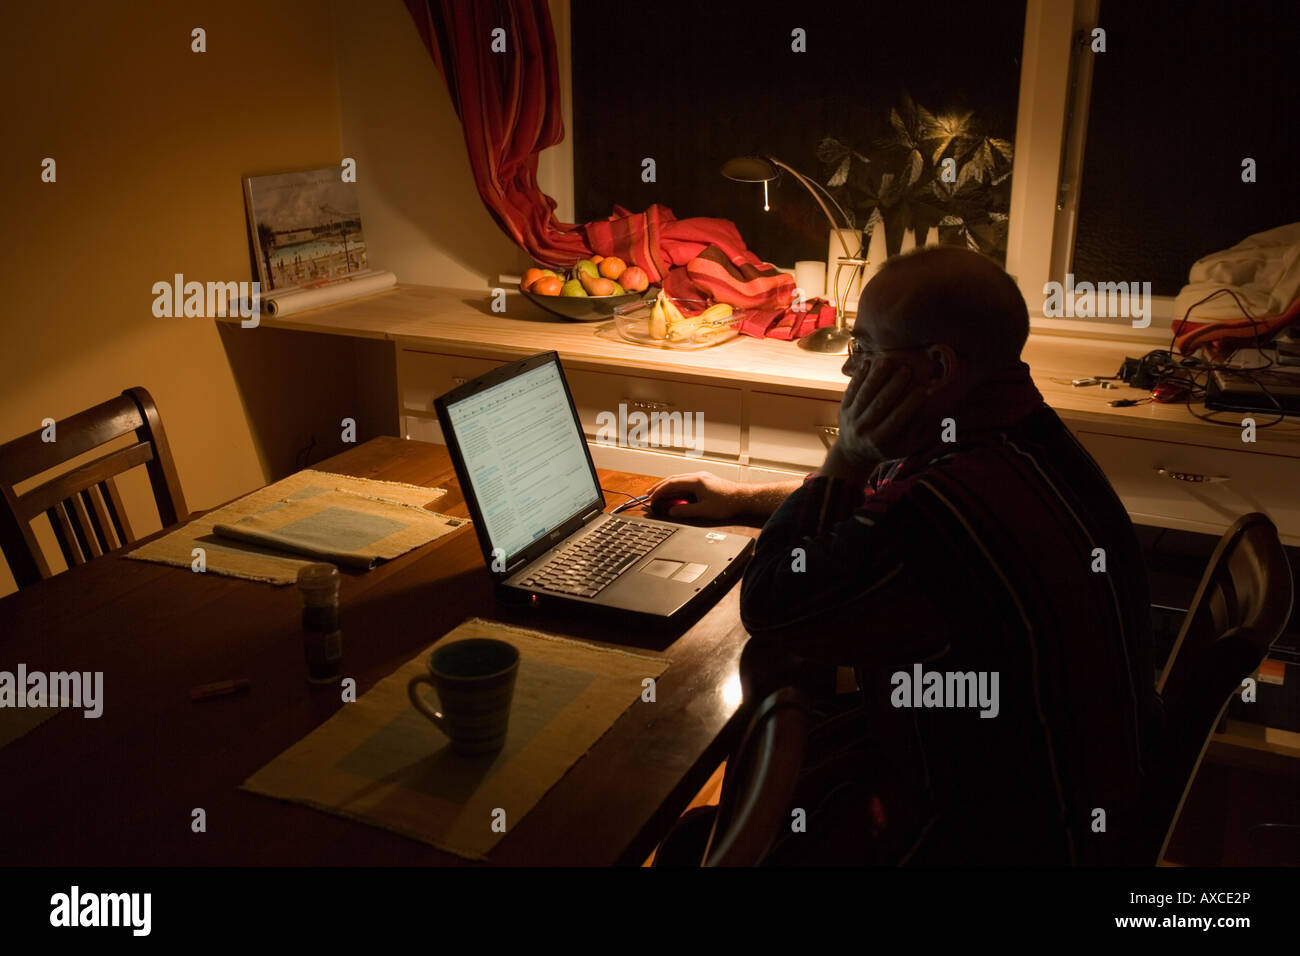 Man forties on the internet at home in a dark room Stock Photo